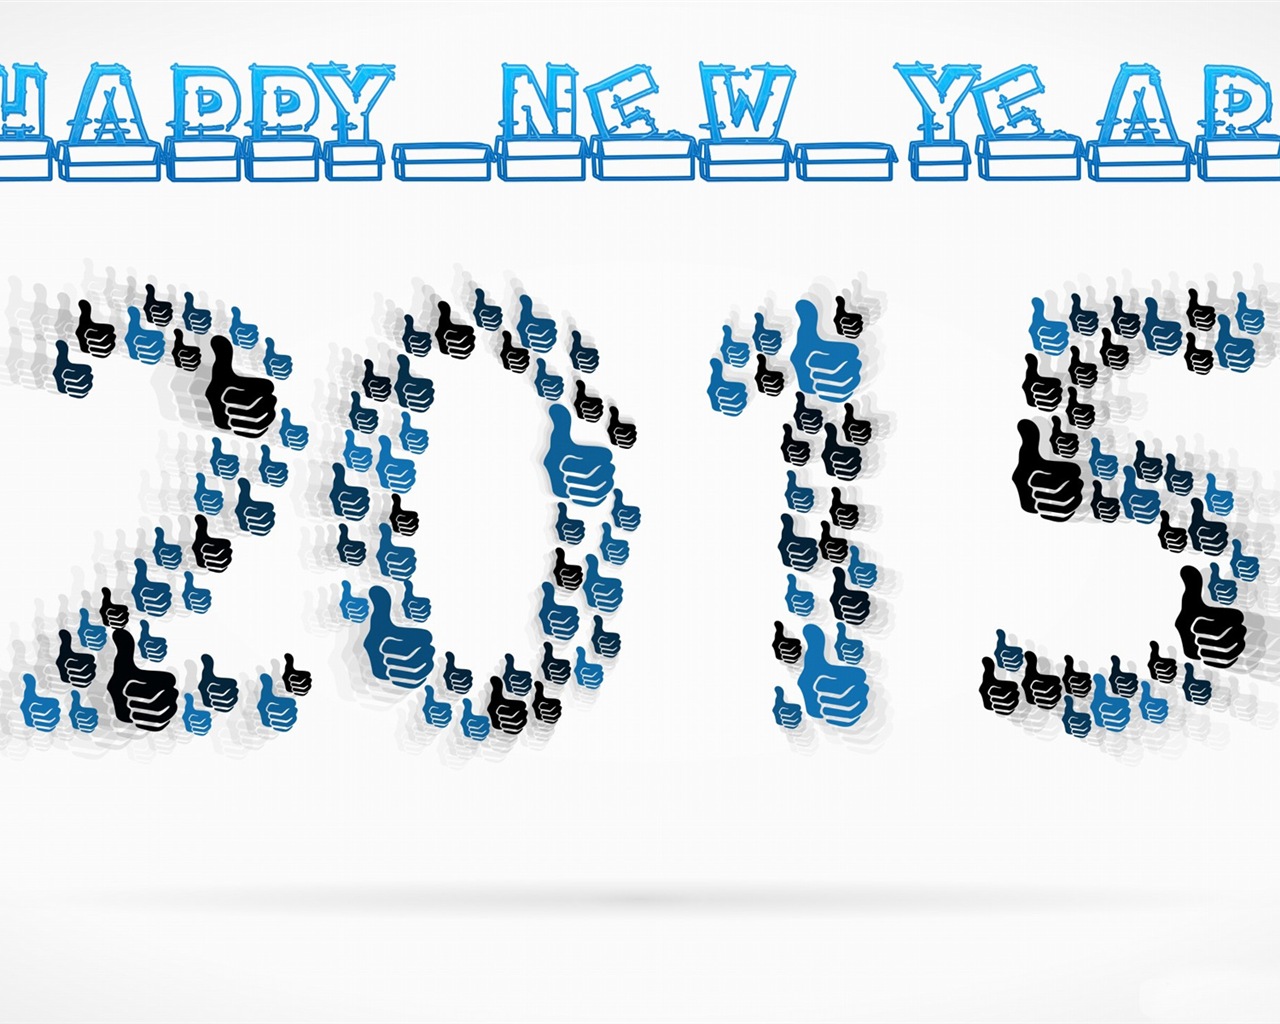 2015 New Year theme HD wallpapers (2) #10 - 1280x1024